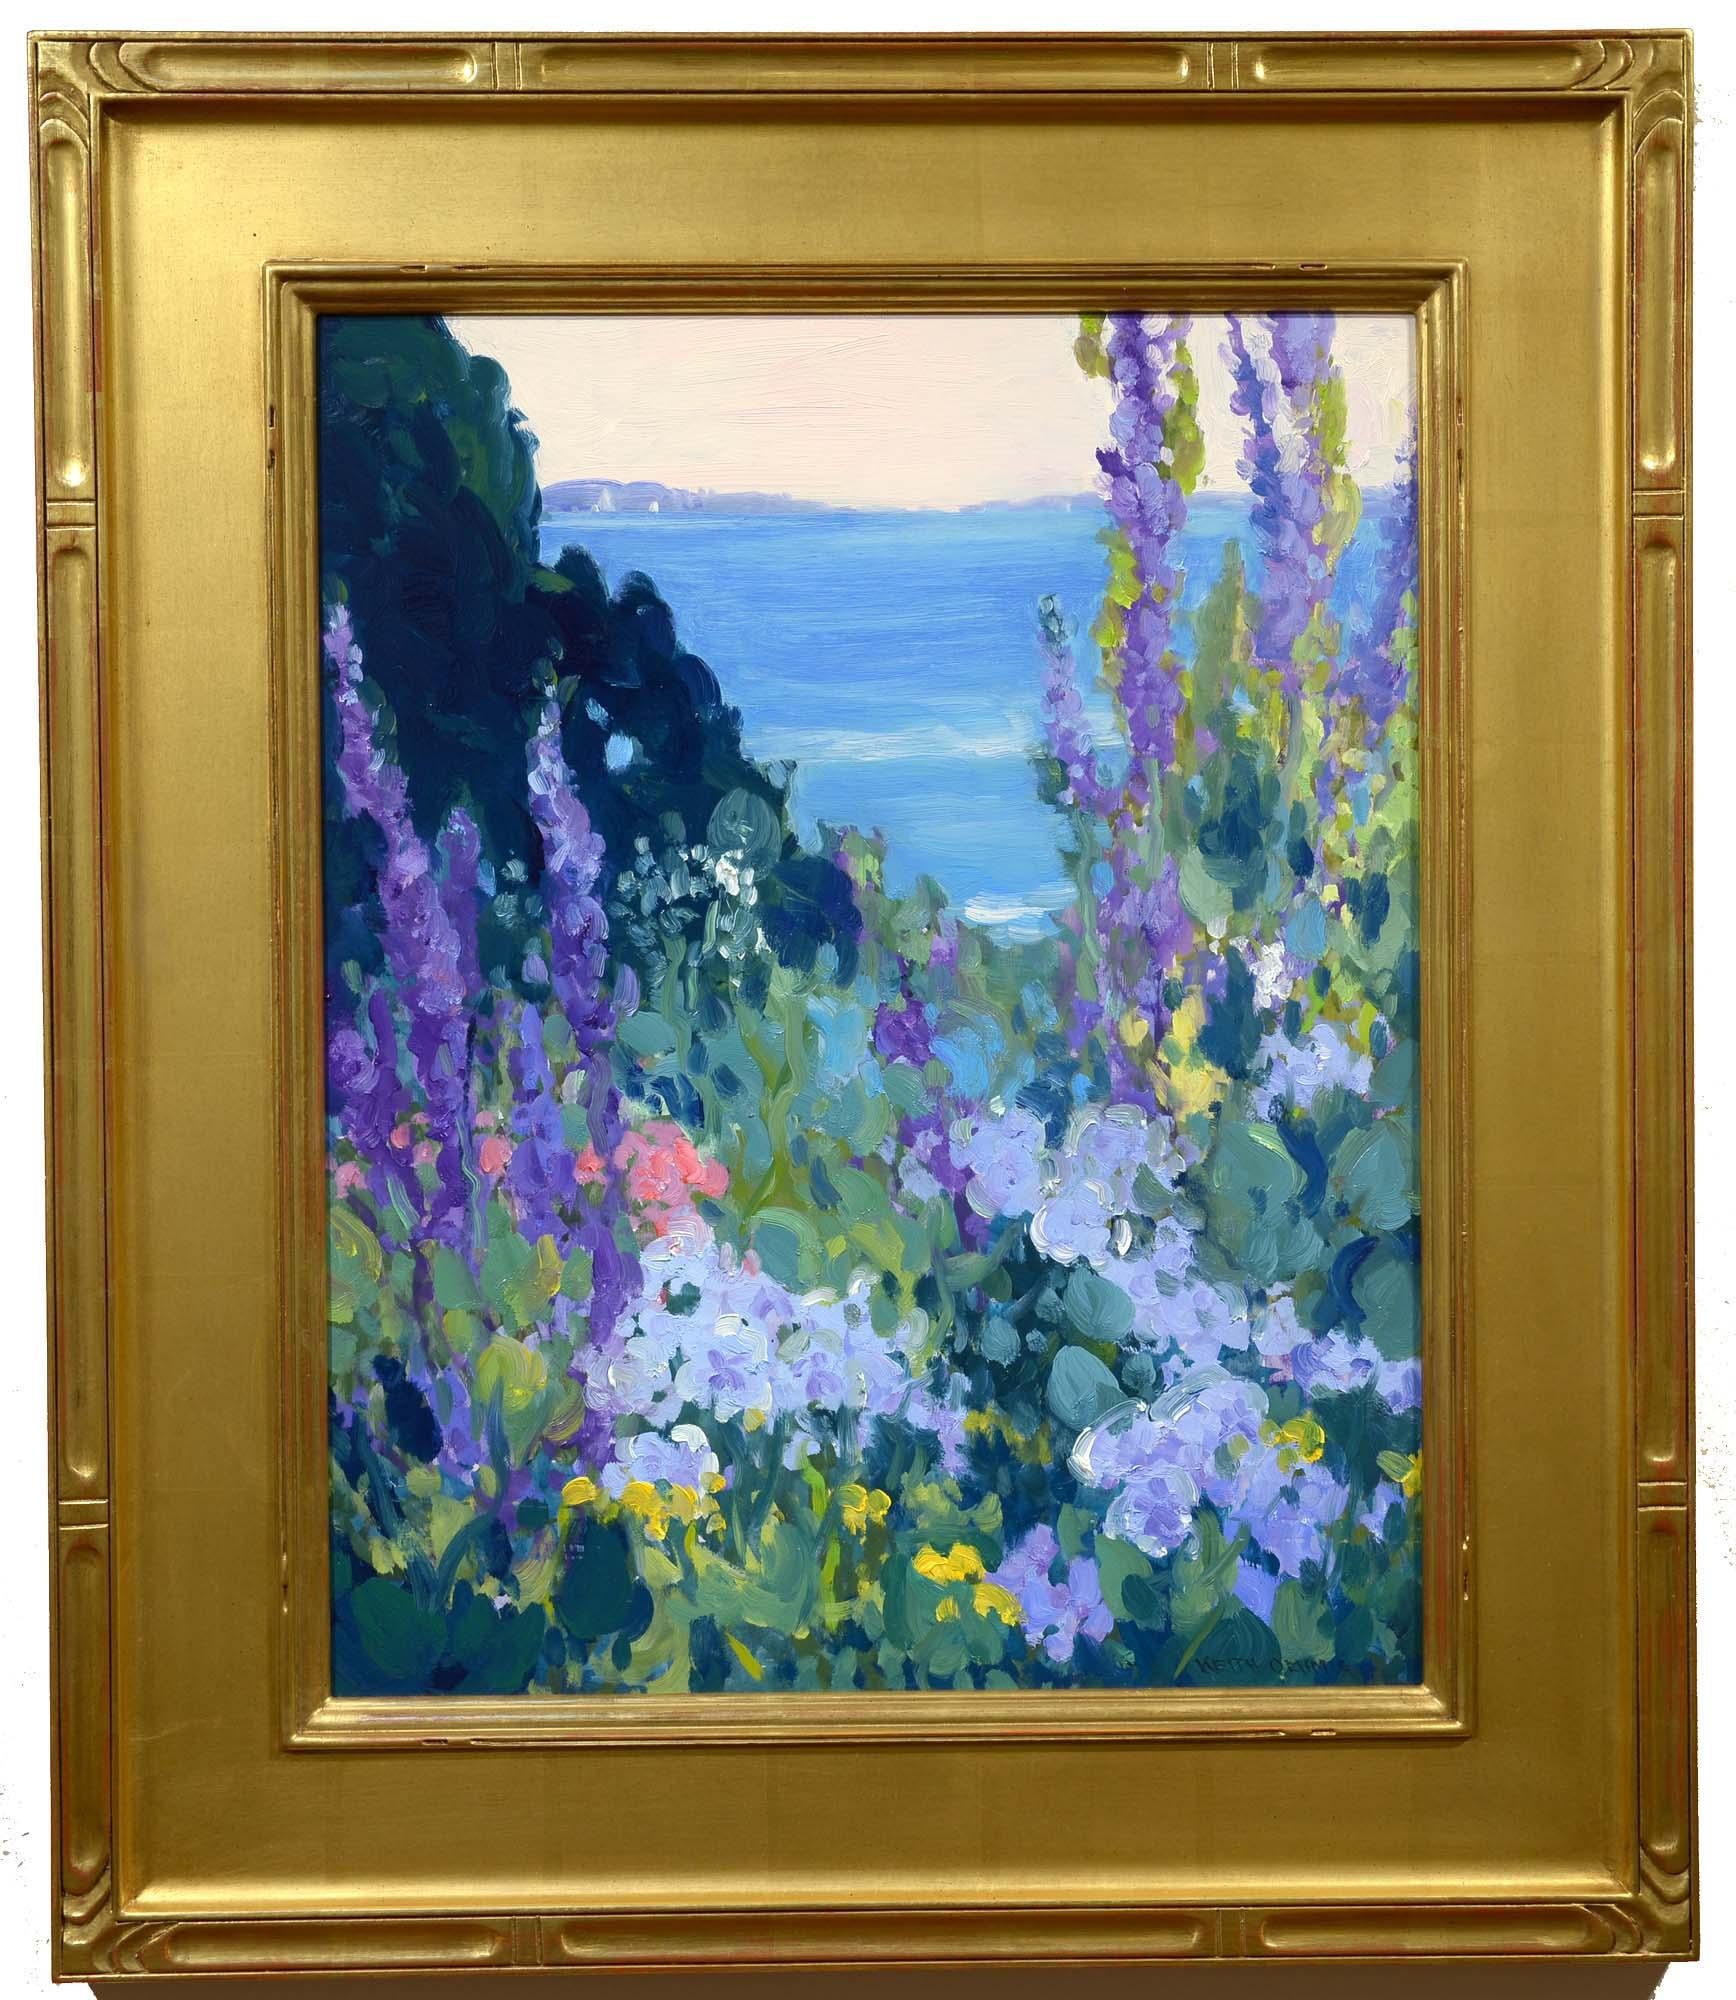 Summer Garden, Harpswell, Maine, Flowers, Coastal, Landscape, Impressionist, Oil - Painting by Keith Oehmig